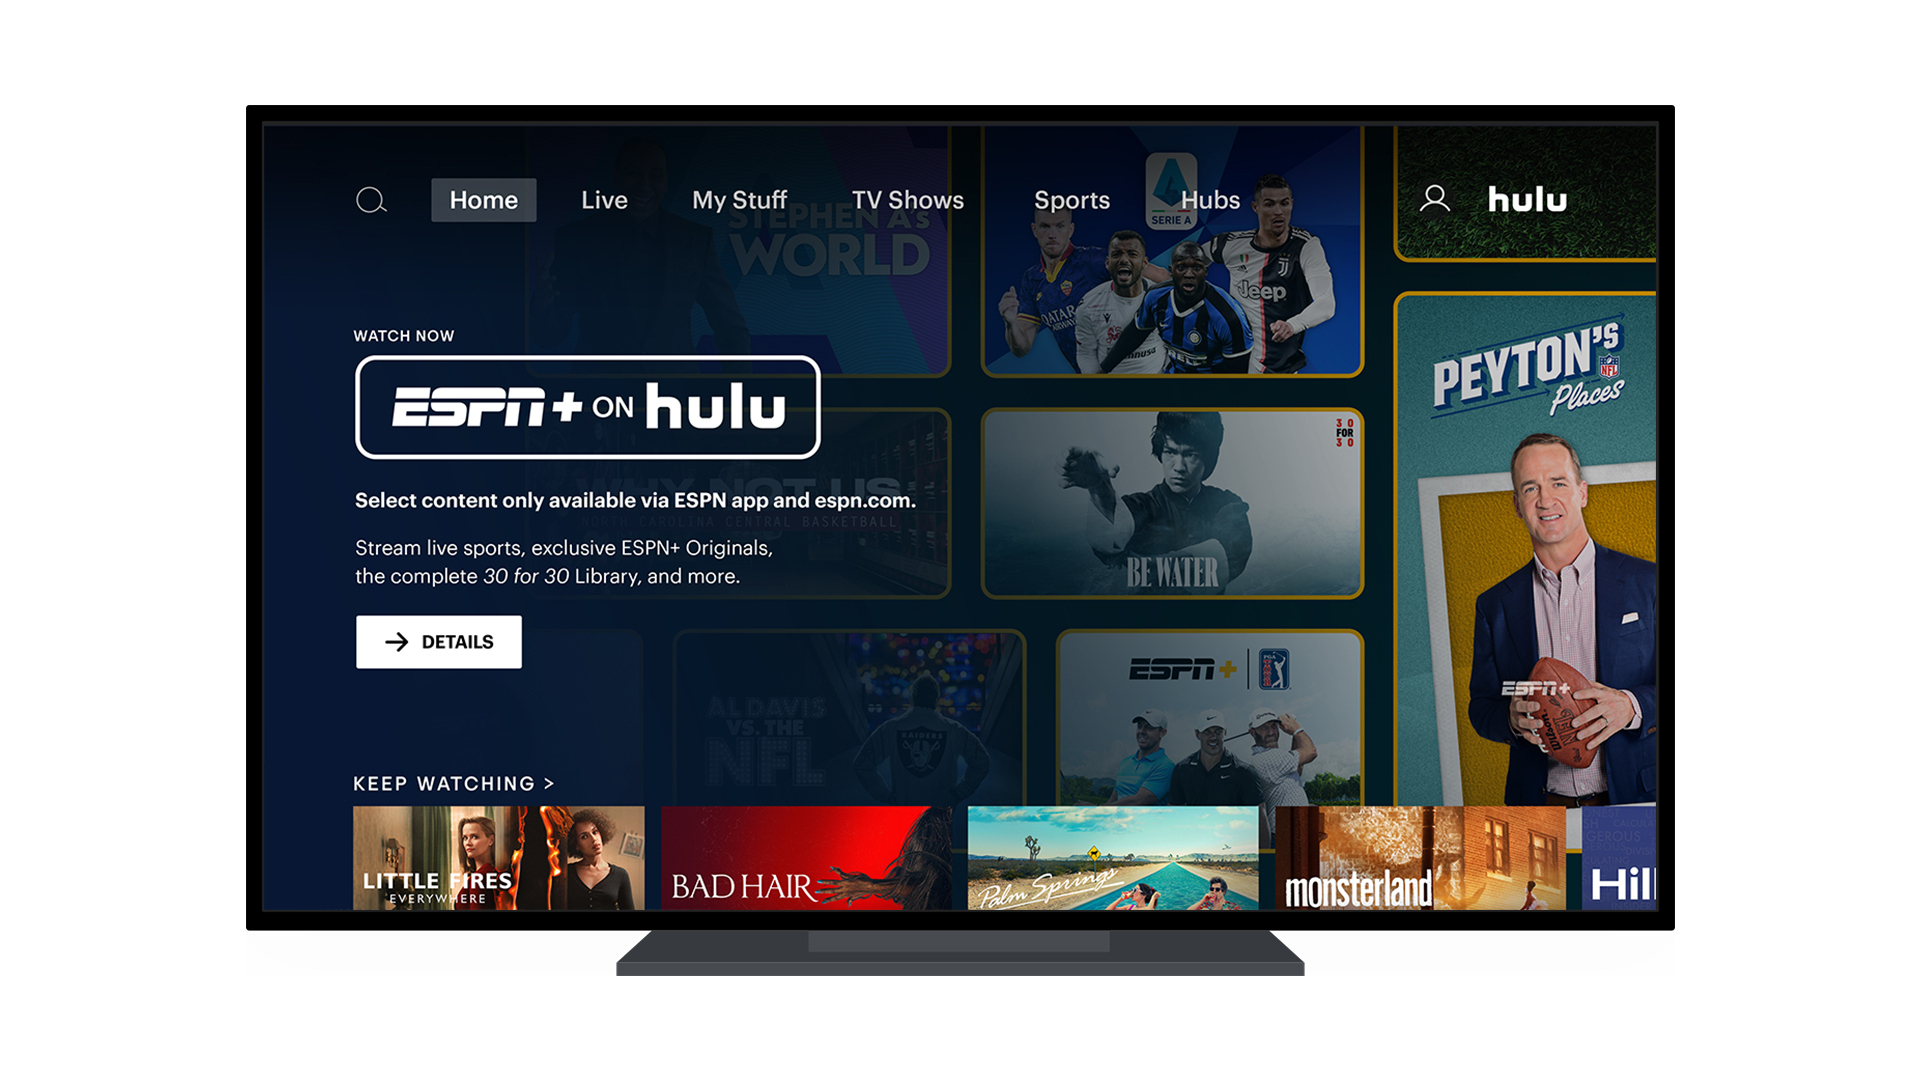 amazon prime sports rugby